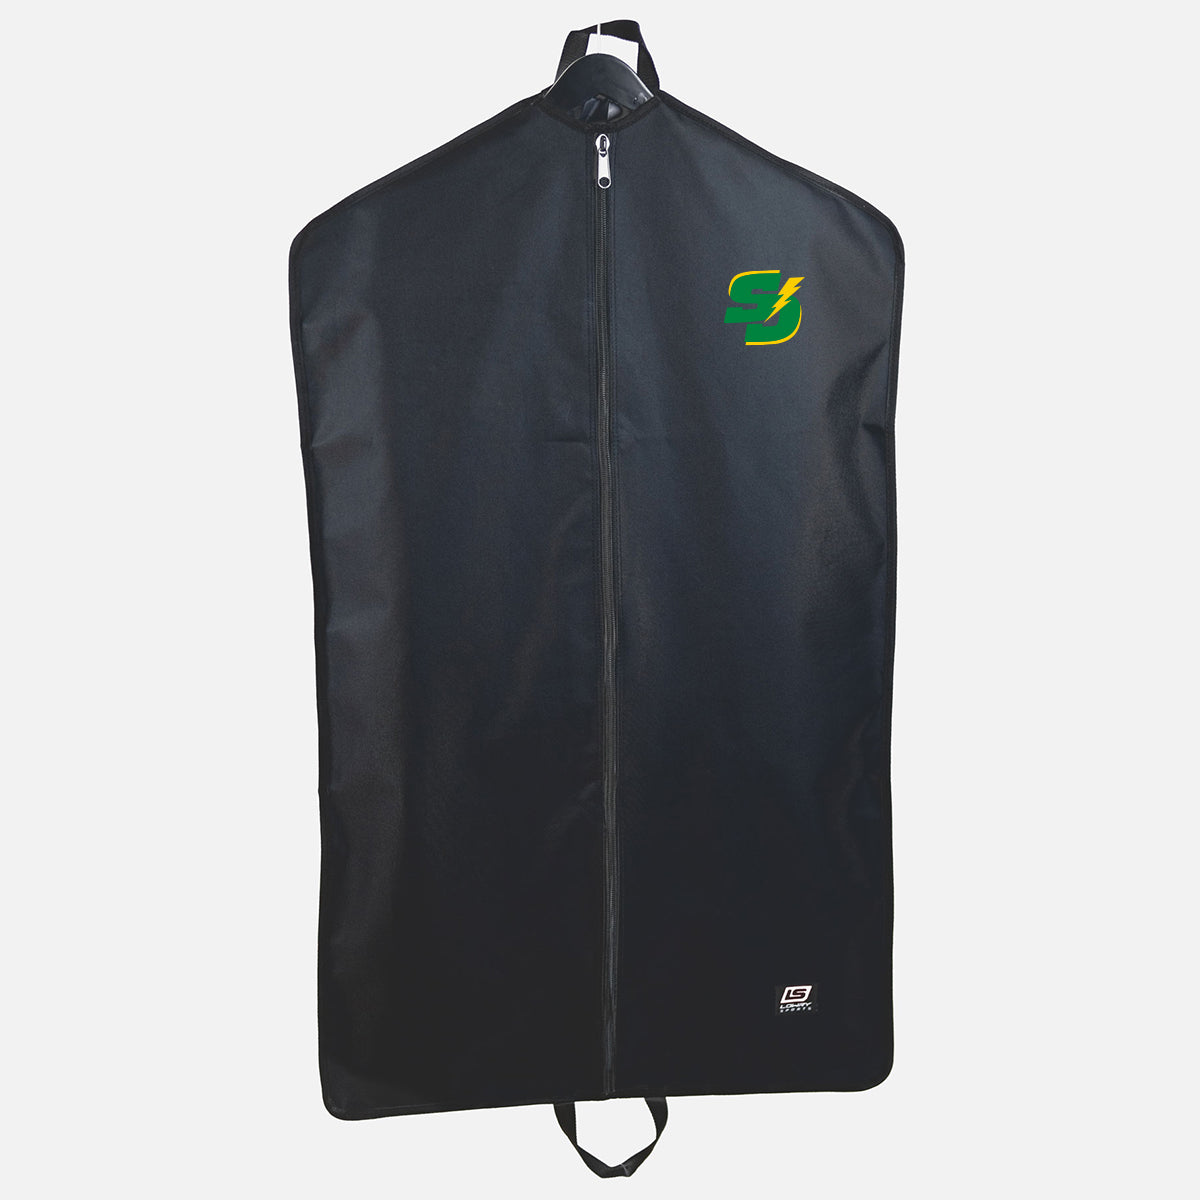 South Delta -- Lowry's Individual Garment Bag